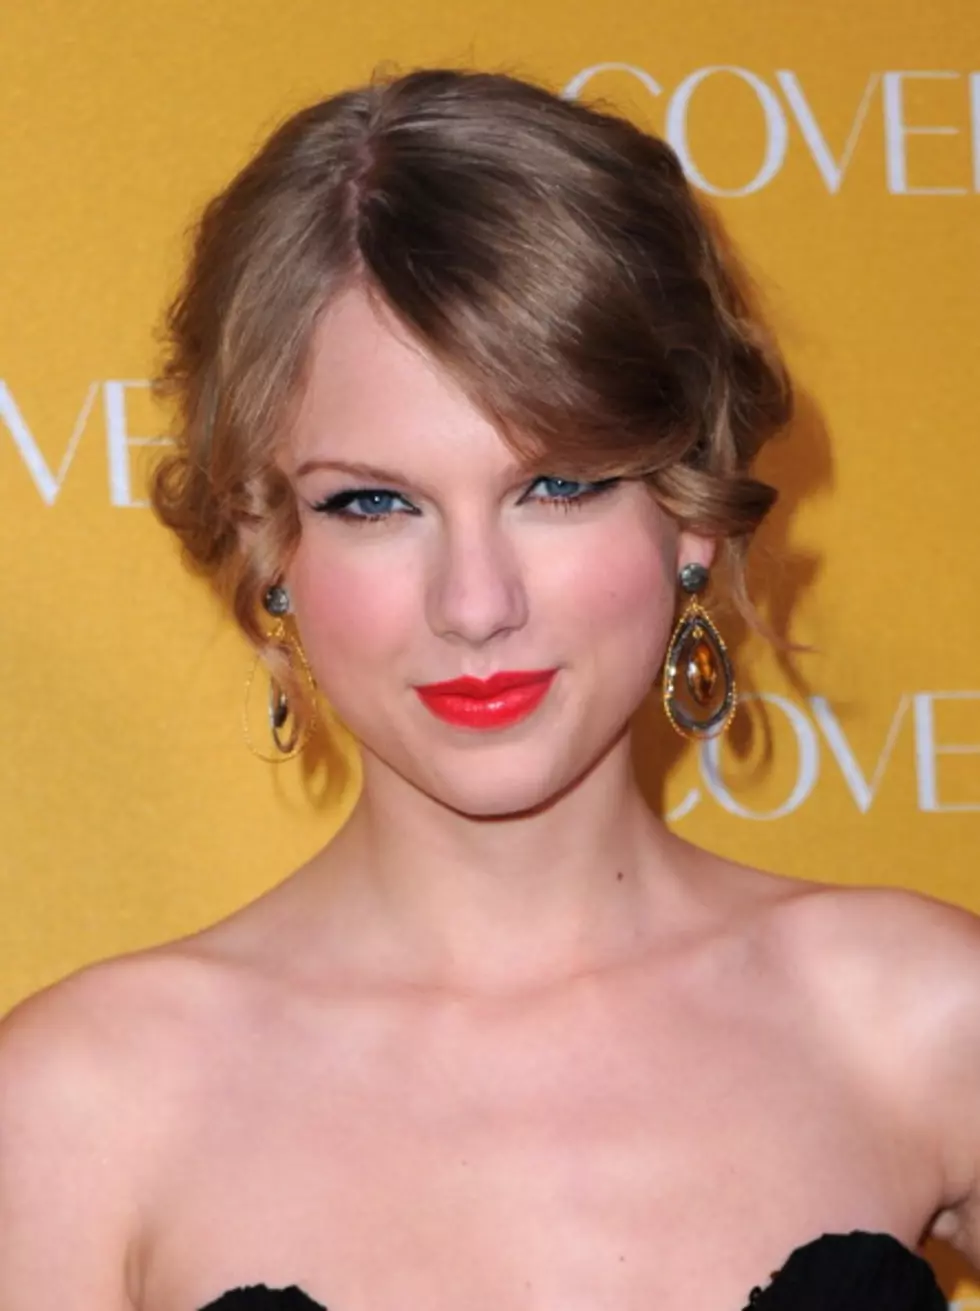 Alabama Student asks Taylor Swift to “Our Prom” [VIDEO]